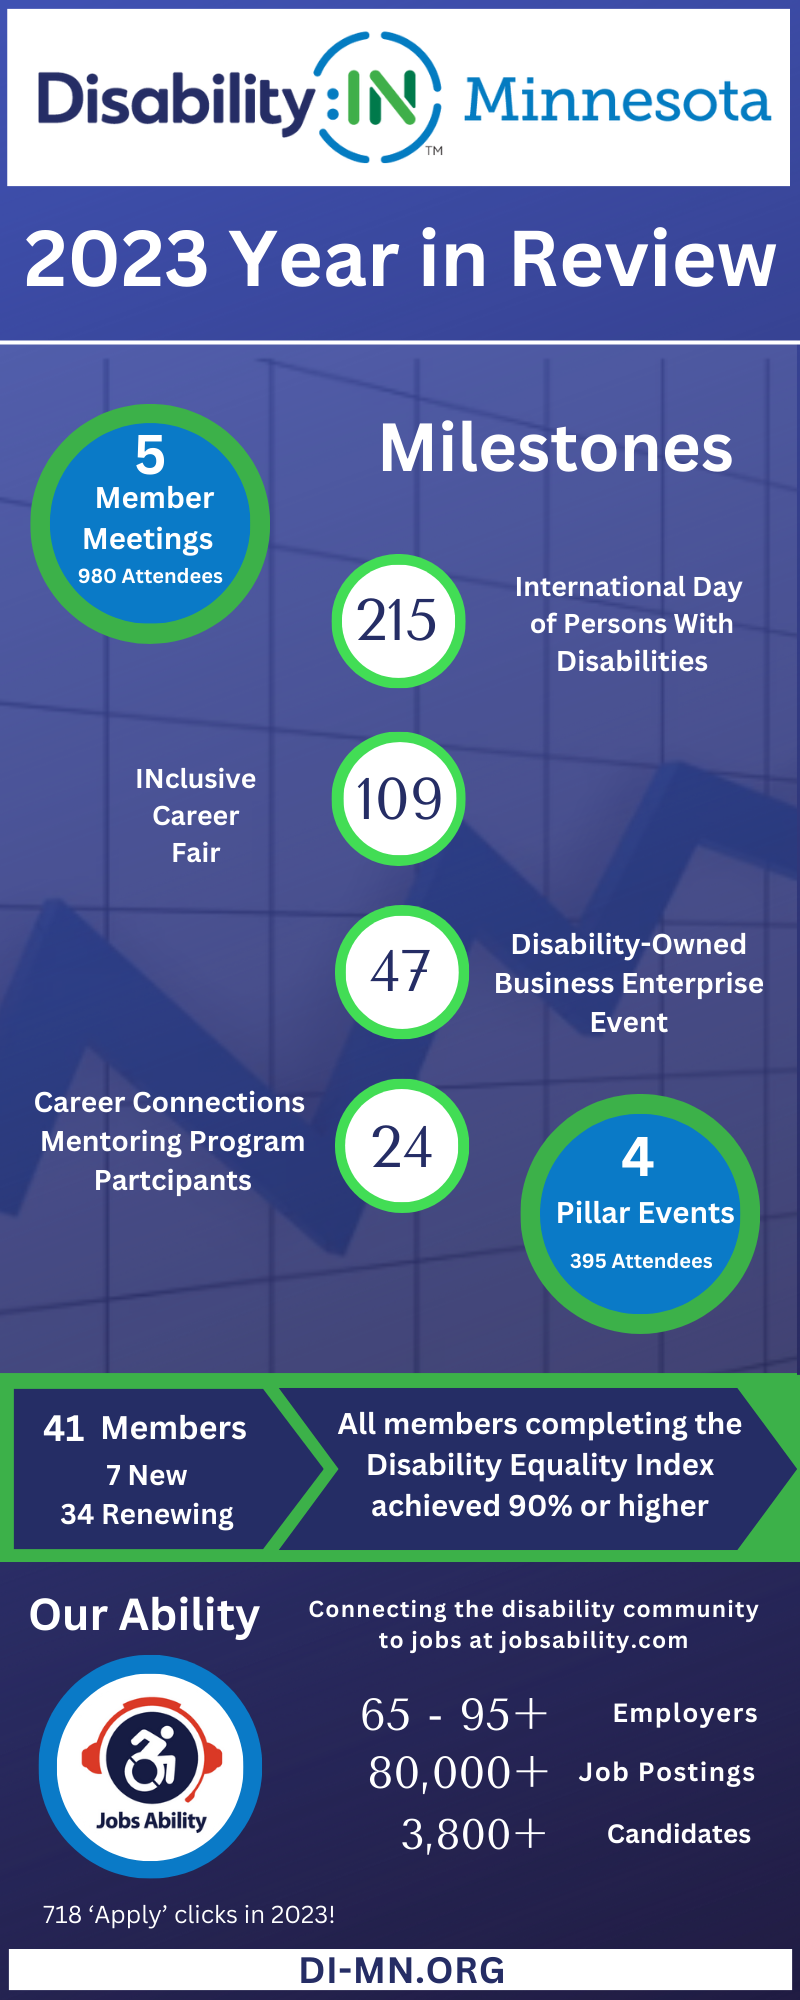 Disability:IN Minnesota 2023 Year in Review Infographic featuring milestones and key metrics from 2023 including member meetings, pillar events, membership highlights, and Jobs Ability numbers (as listed below). The metrics are listed within blue, green, and white bubbles against a dark blue background with a transparent graph design. The bubbles are arranged in a vertical column and membership highlights are listed below in a horizontal arrow design. The Jobs Ability logo, a dark blue and white disability icon featuring a person in a wheelchair with a red headset boarder, and metrics appear at the bottom of the image in white text against a solid dark blue background.